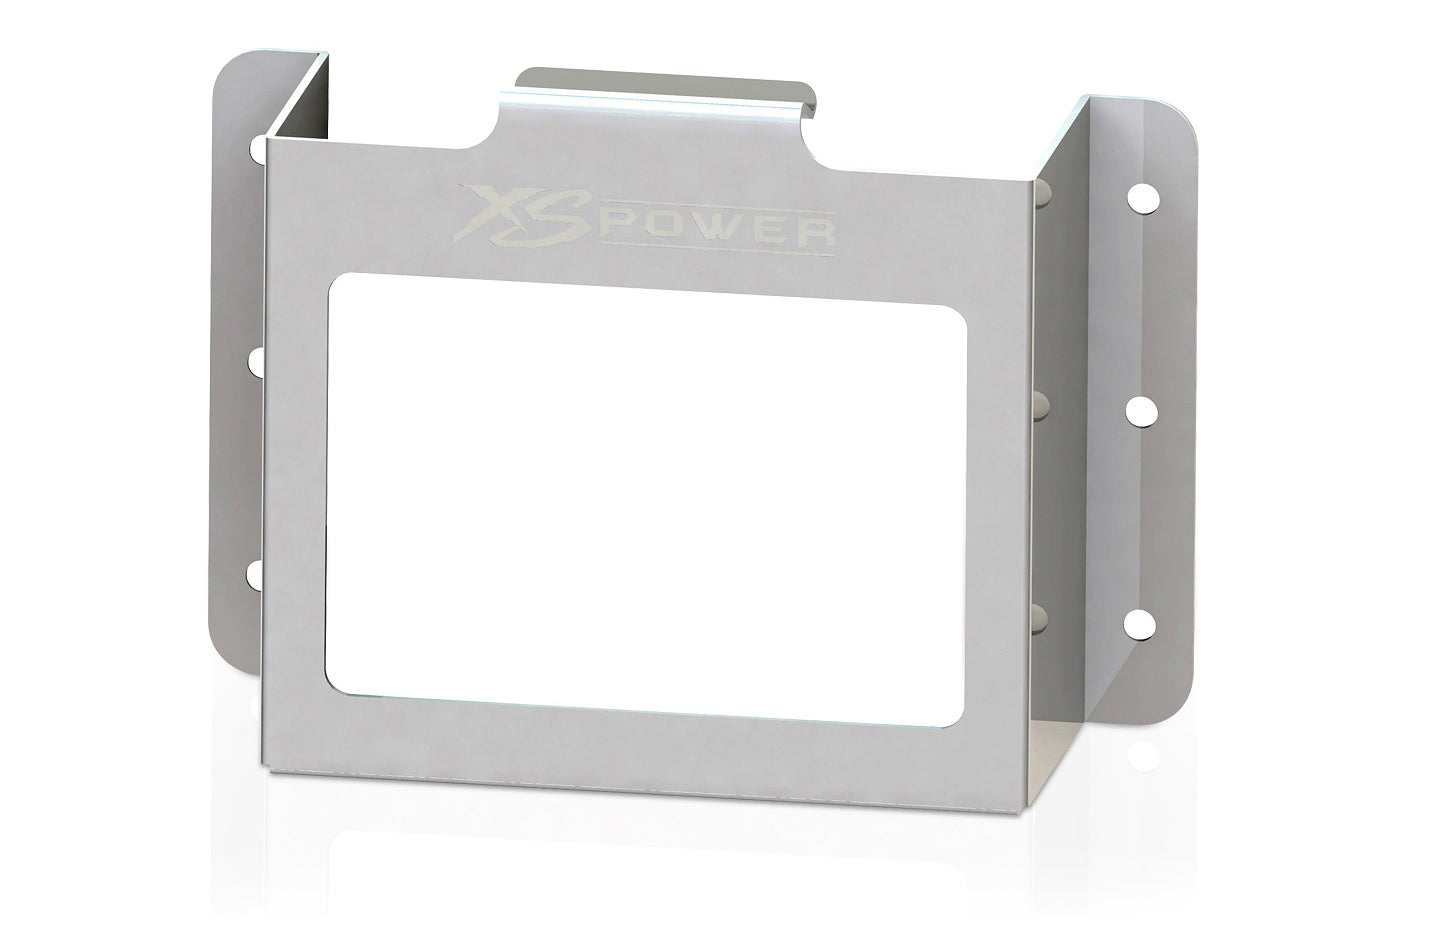 XS Power 511 680 Series and XP750 Side Vehicle Battery Mount Box Window